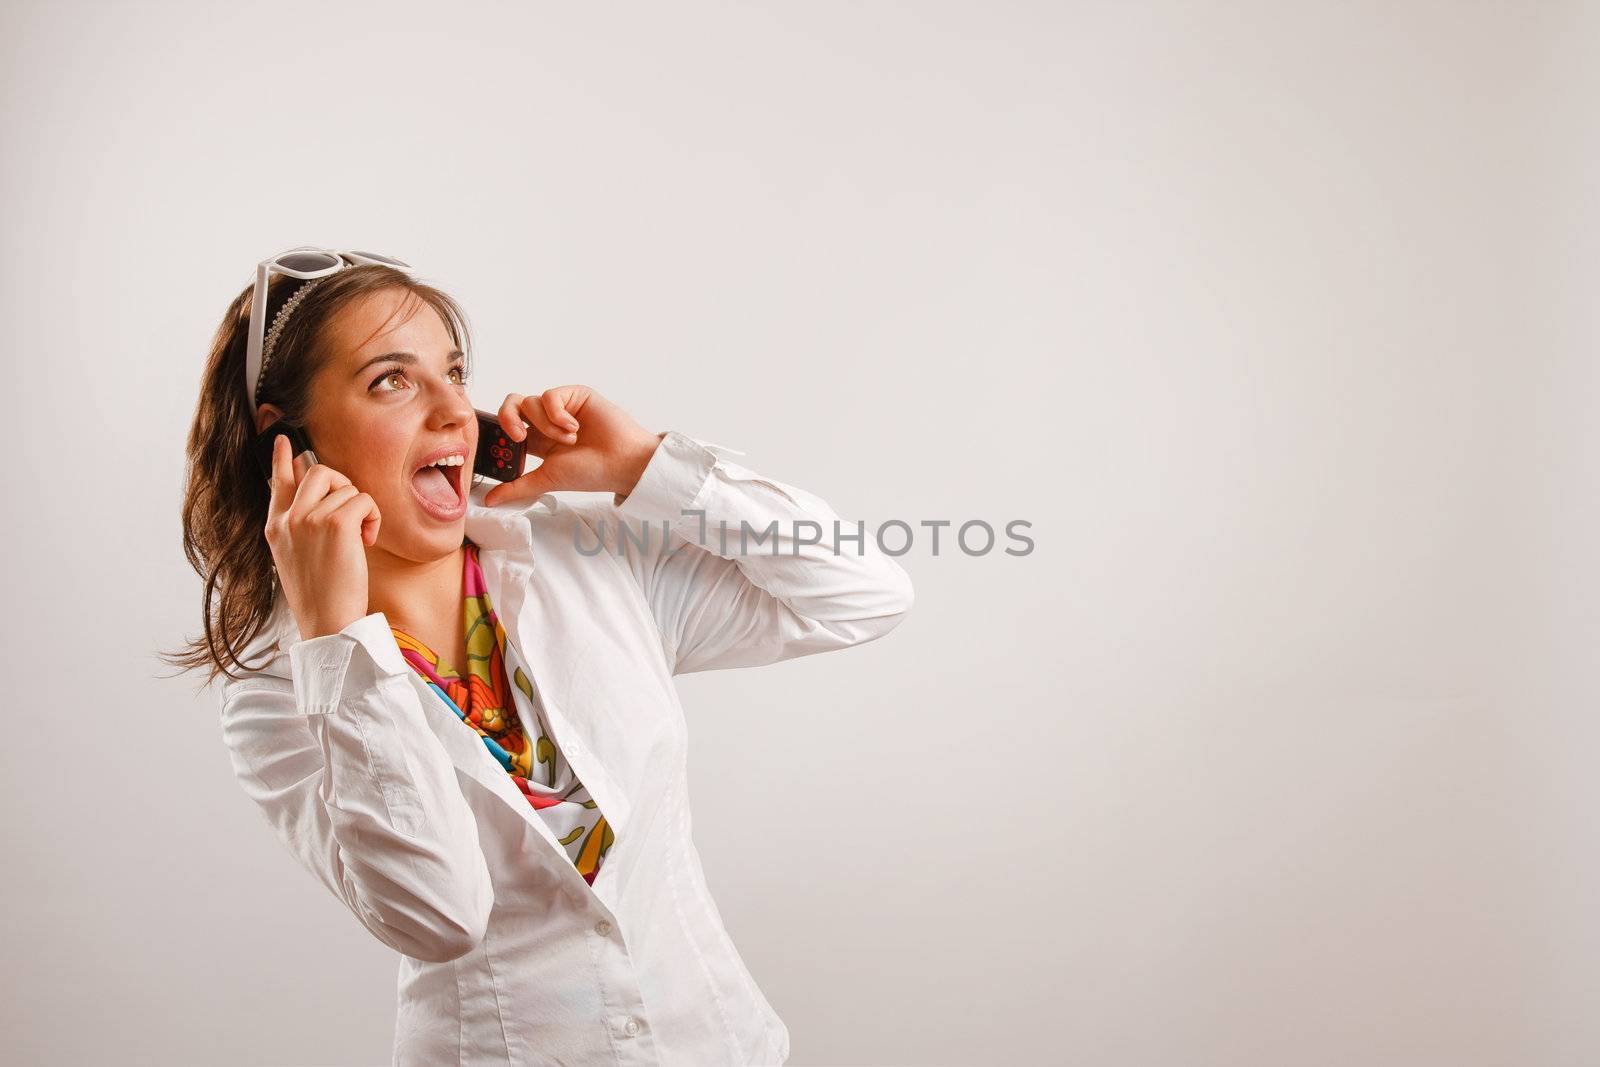 Modern looking young woman wearing white jacket talking on the phone